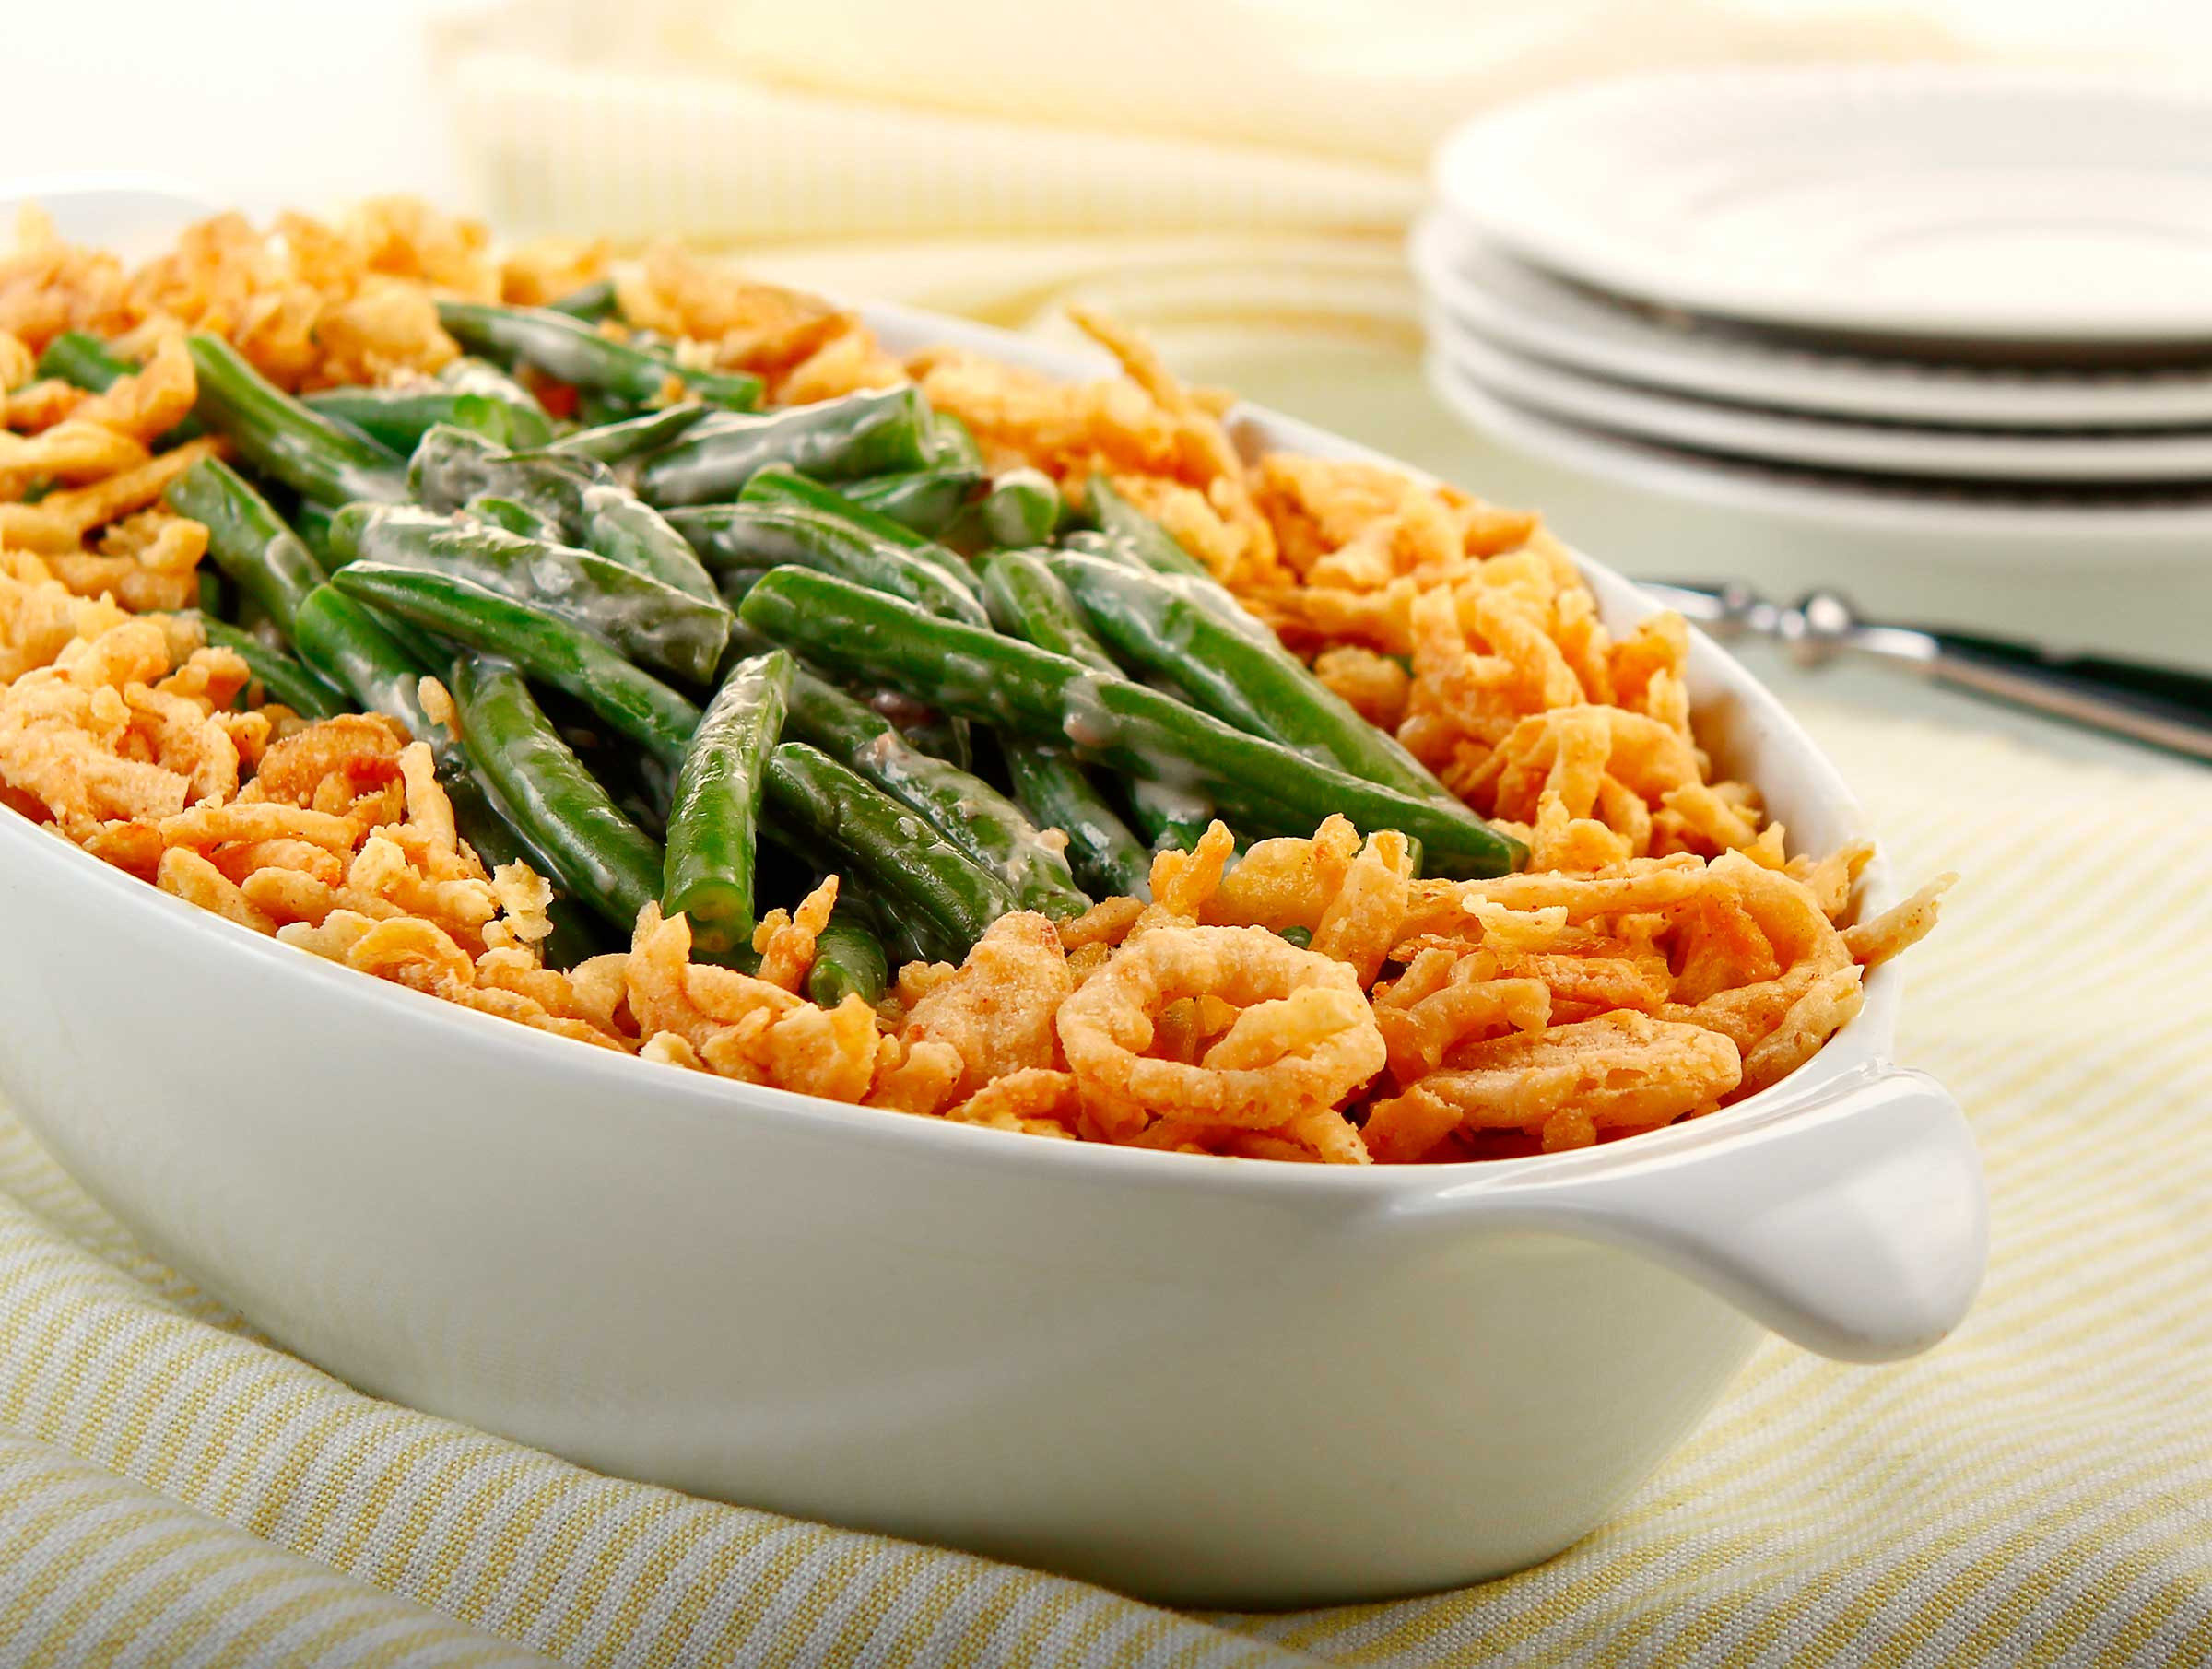 Best Green Bean Recipe For Thanksgiving
 Best and Worst Thanksgiving Foods for Weight